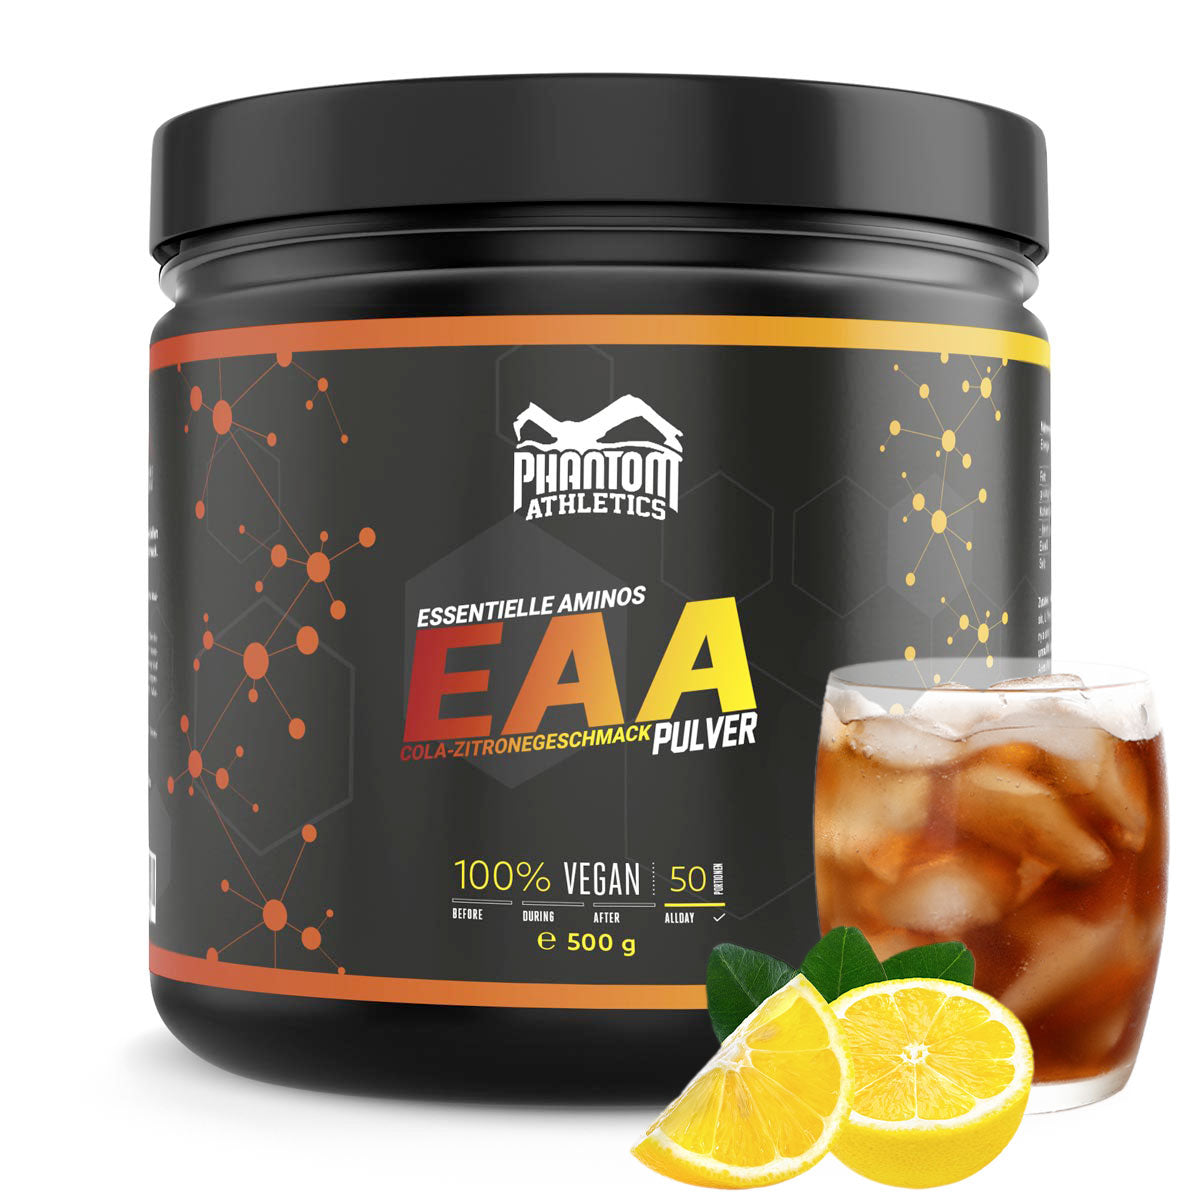 Phantom EAA amino powder for martial arts. Ideal protein supply for your next fight. Whether MMA, Muay Thai, boxing, BJJ or kickboxing. With the EAA in cola flavor you can take your martial arts to the next level.